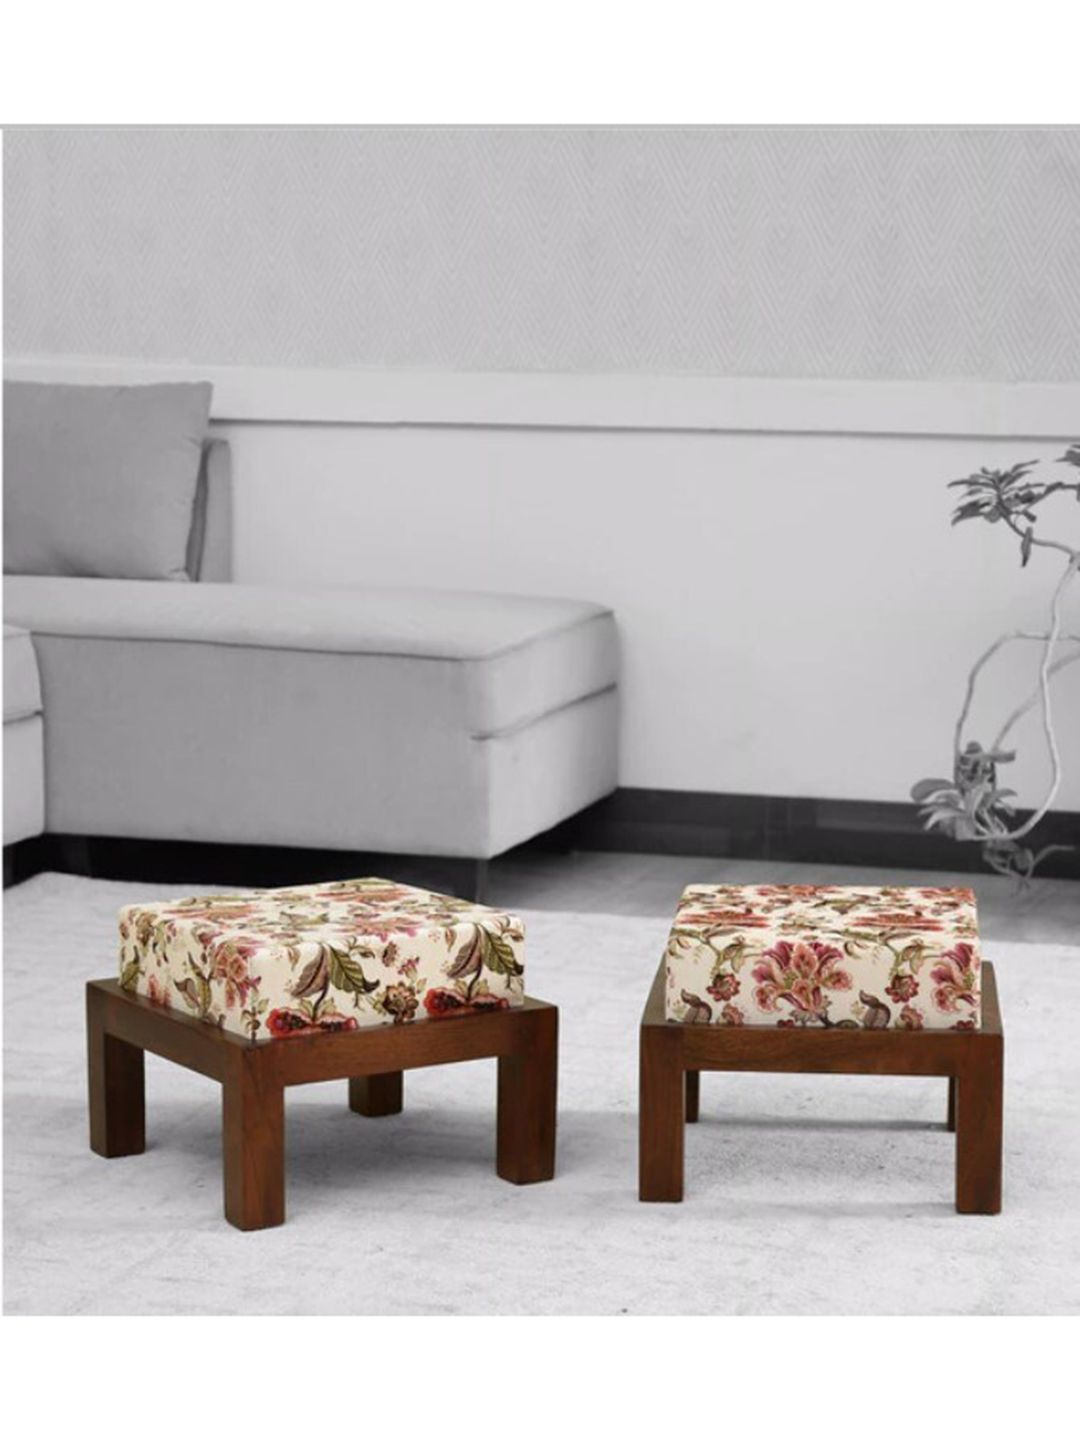 GLOBALLY INDIAN Set of 2 Cream & Brown Printed Acacia Wood Low-Heighted Ottomans Price in India